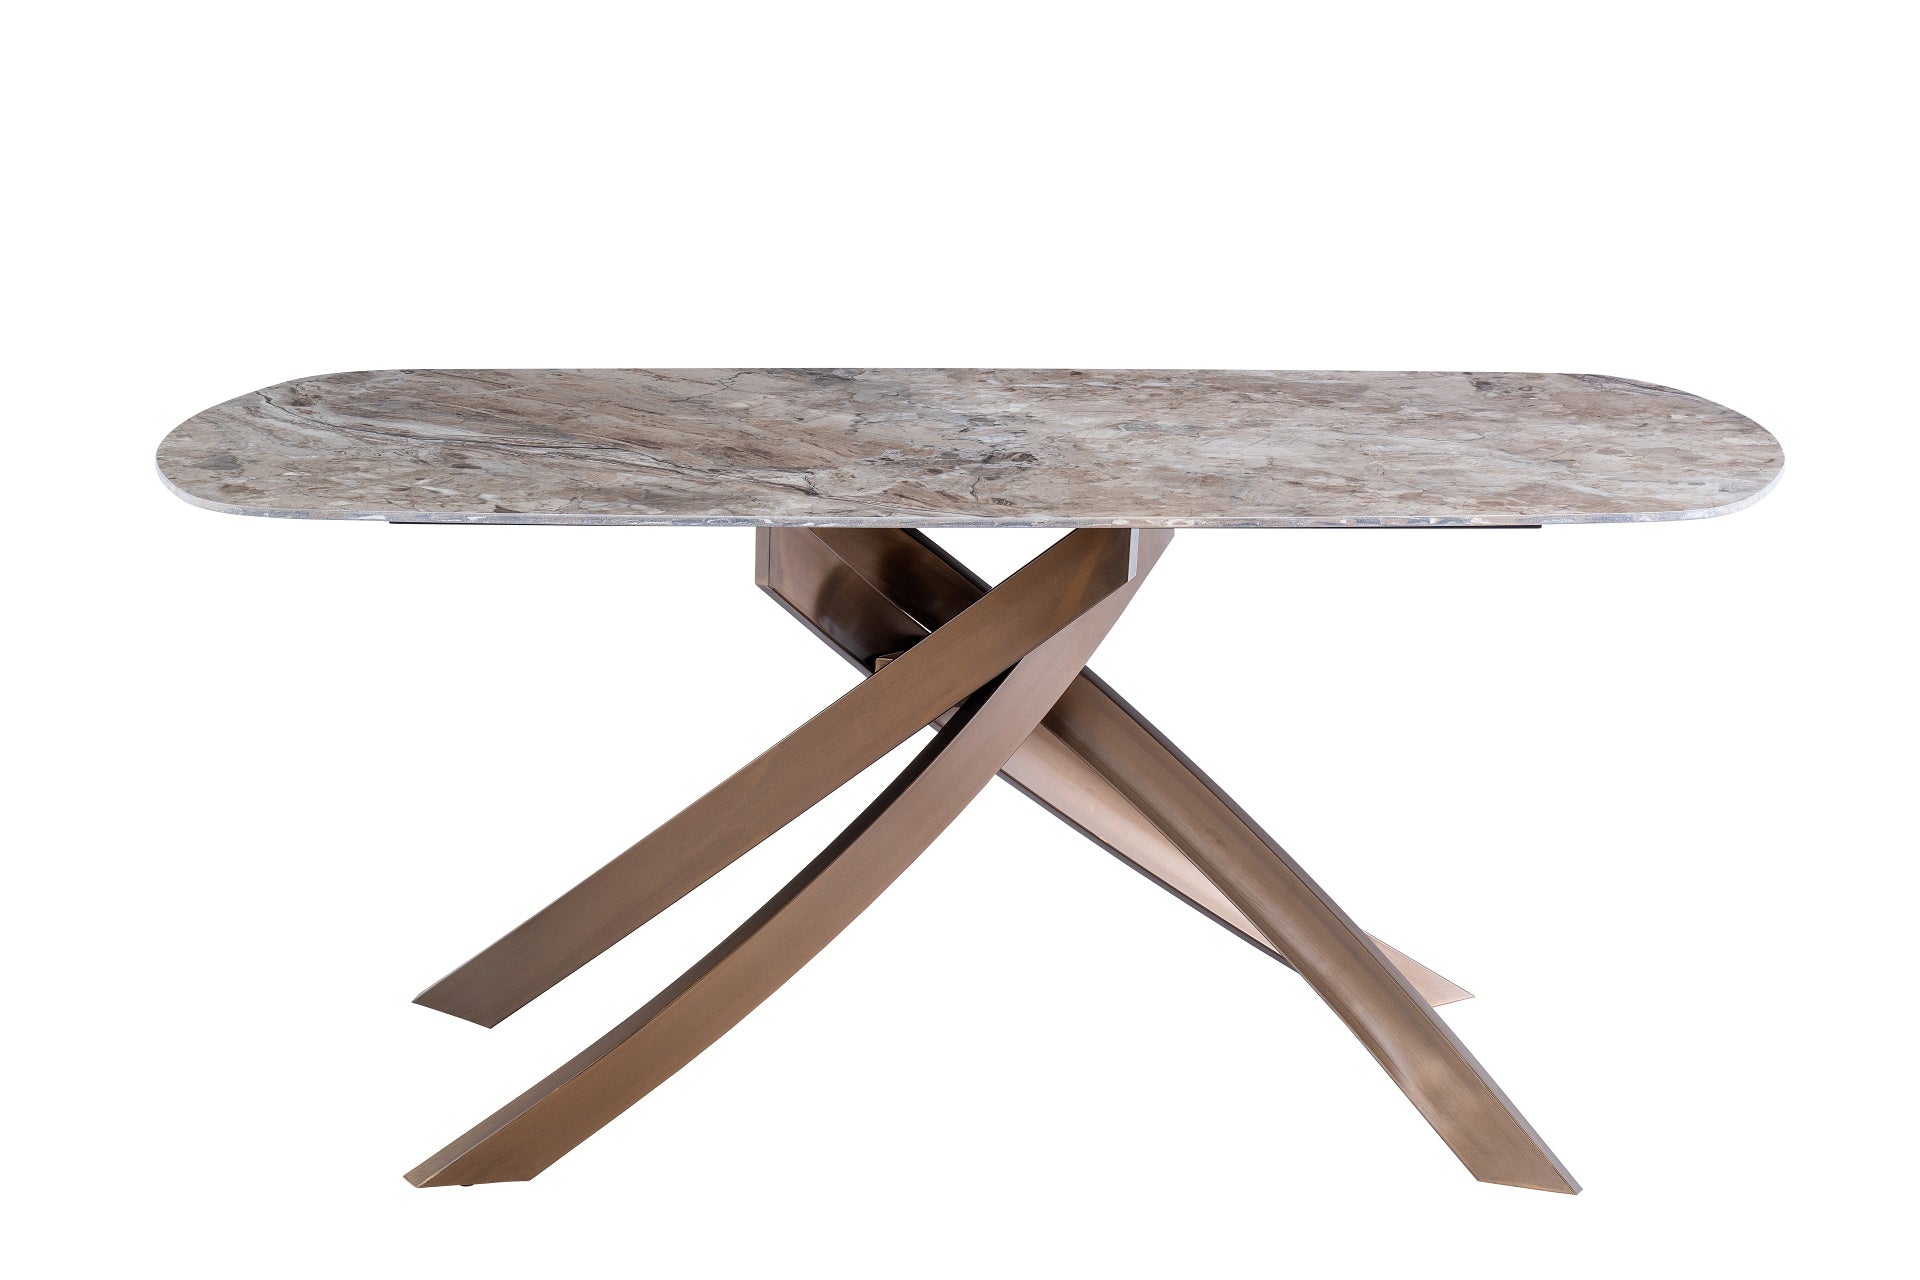 Fenna 1.8m Dining Table - Brown Marble / Brushed Brass Leg